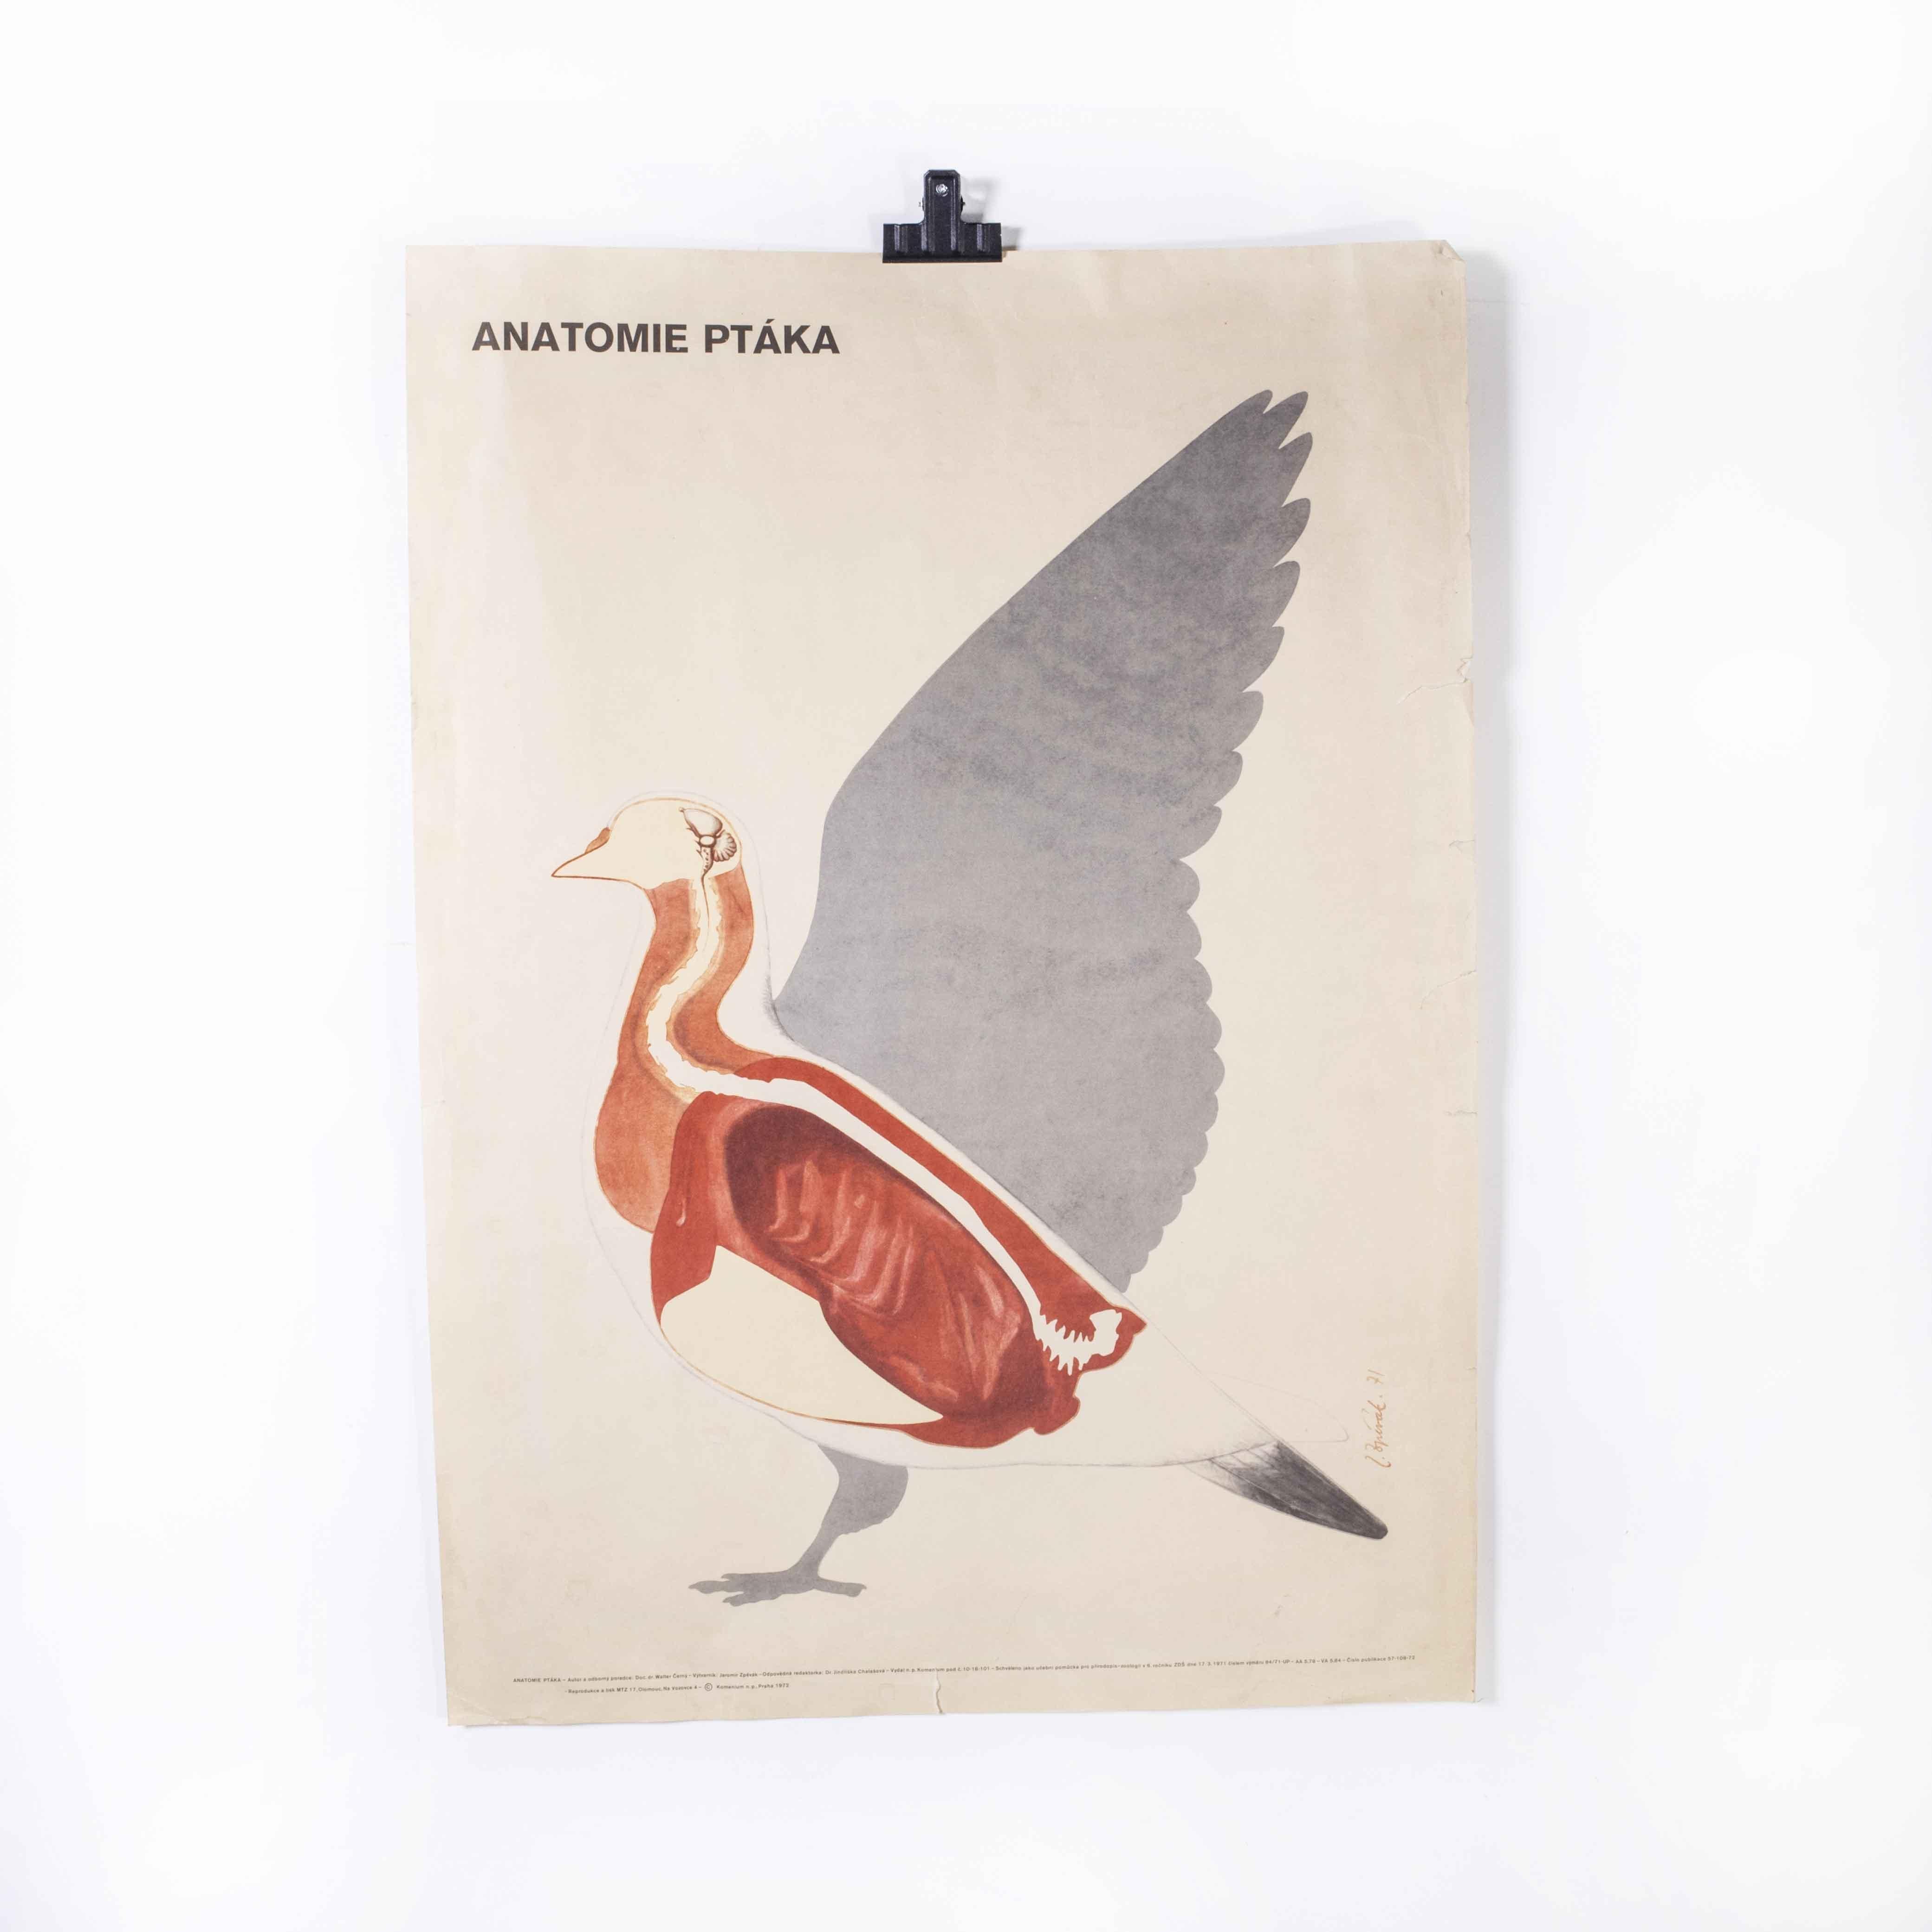 1970’s Goose Educational Poster
1970’s Goose Educational Poster. Early 20th century Czechoslovakian educational chart. A rare and vintage wall chart from the Czech Republic illustrating the anatomy of a goose. This heavyweight paper poster is in